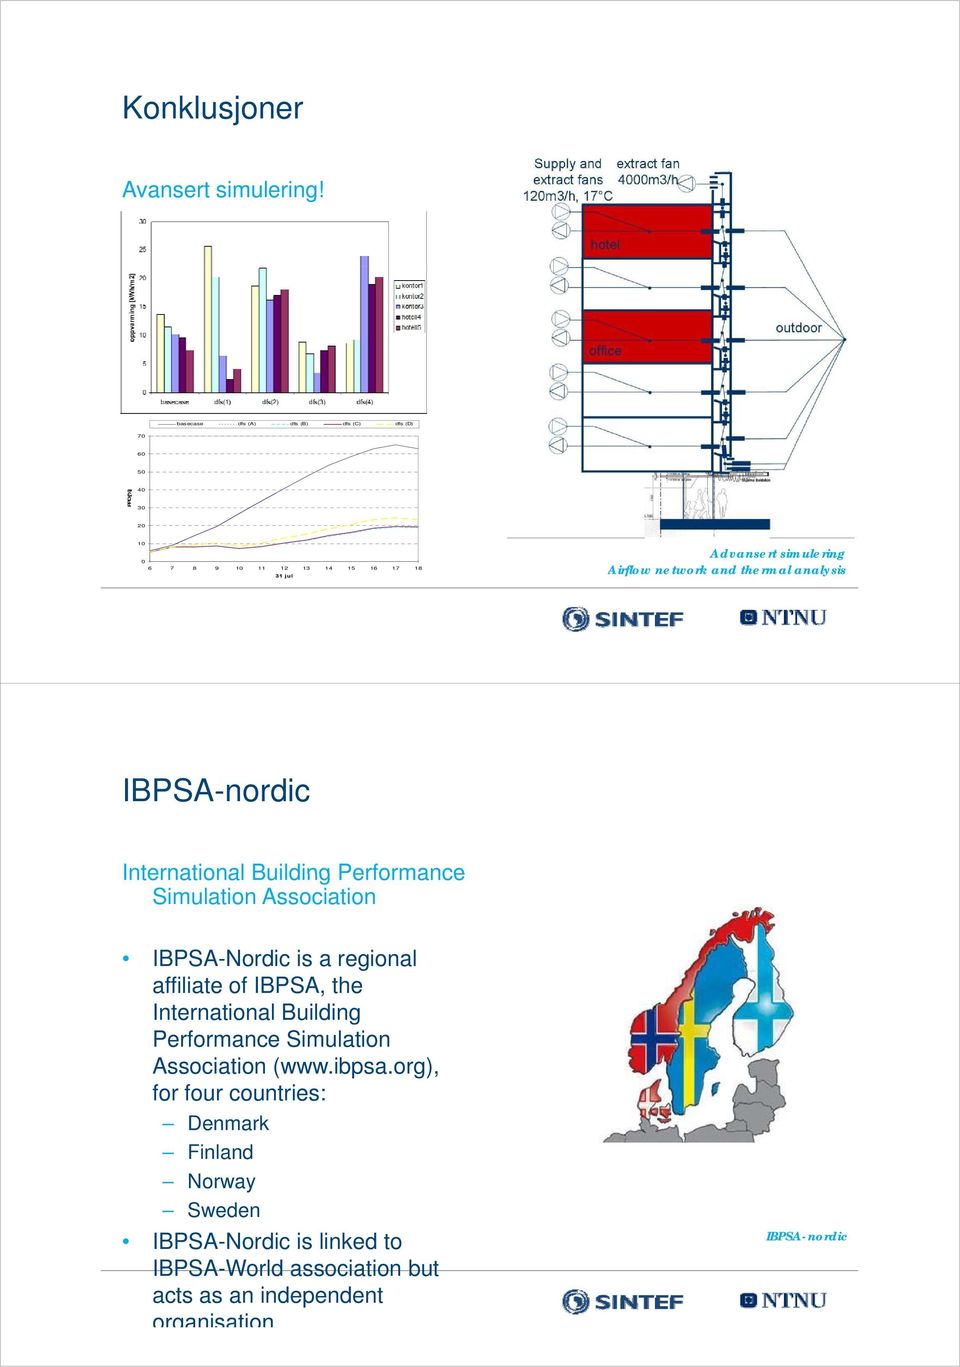 Airflow network and thermal analysis IBPSA-nordic International Building Performance Simulation Association IBPSA-Nordic is a regional